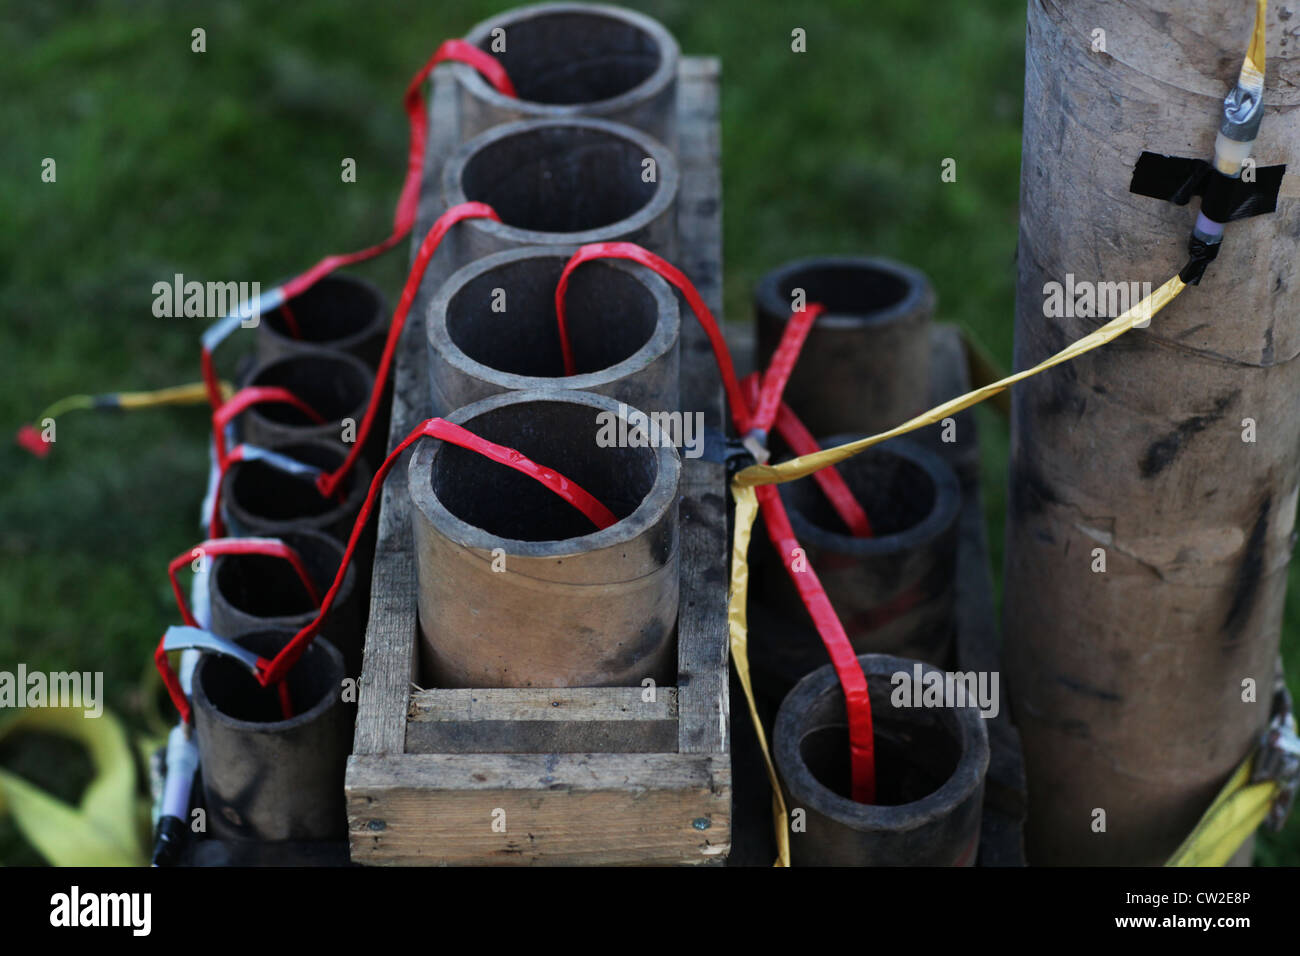 Professional firework launch set up tubes and electrical leads Stock Photo